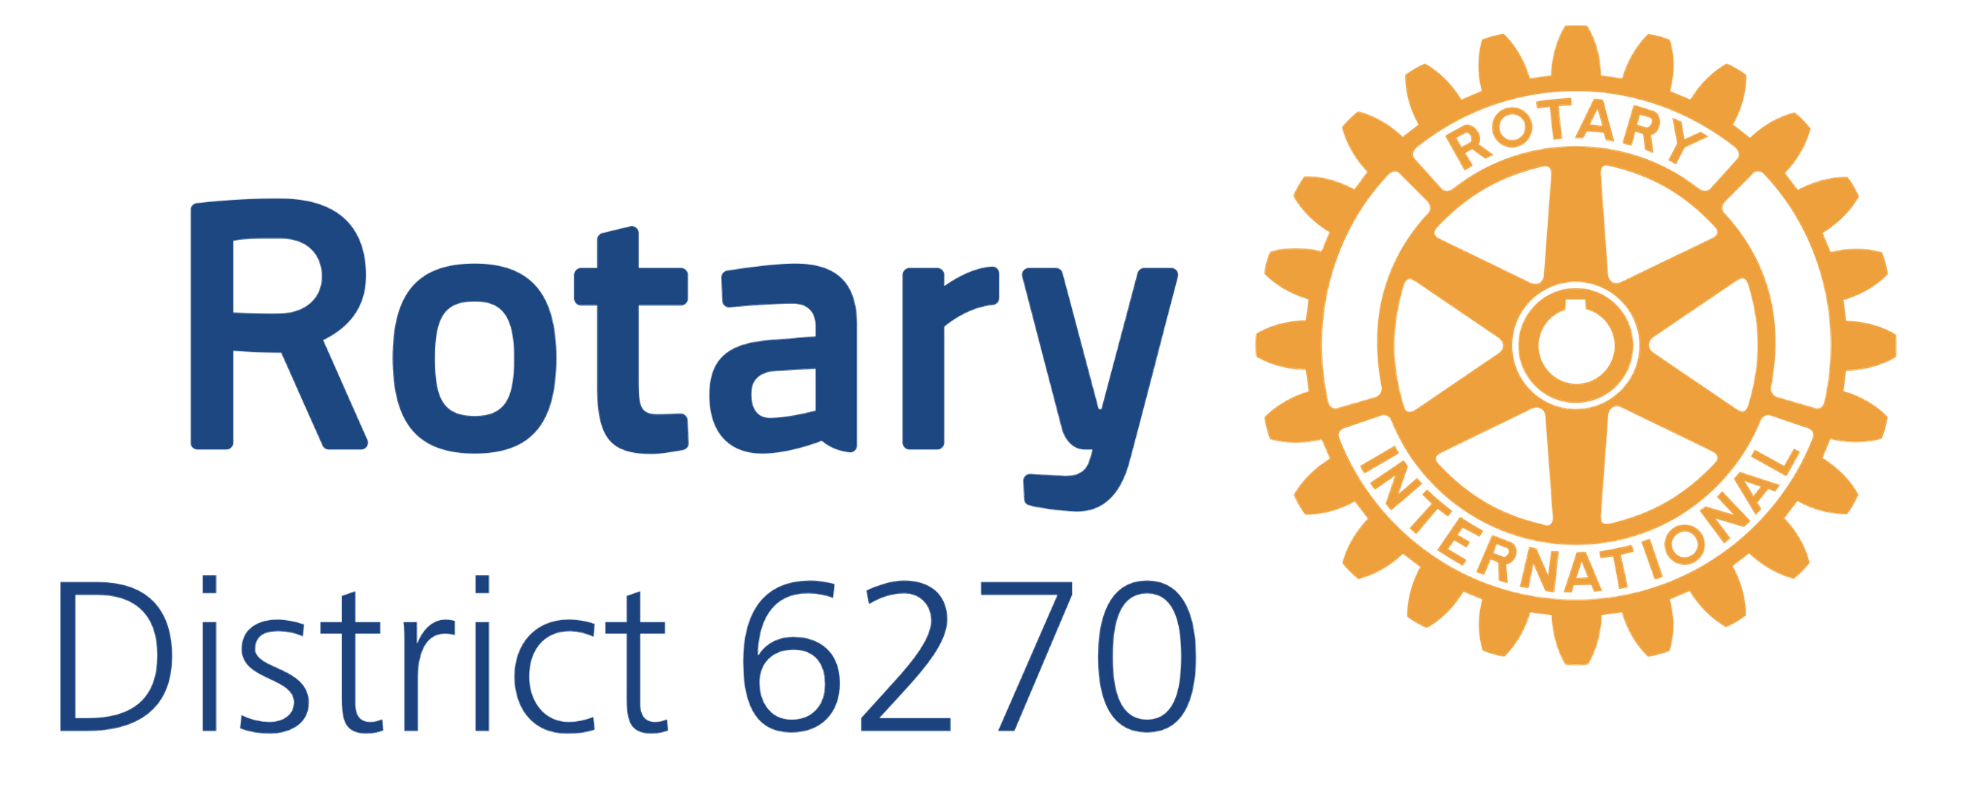 Rotary District 6270 with Rotary Wheel